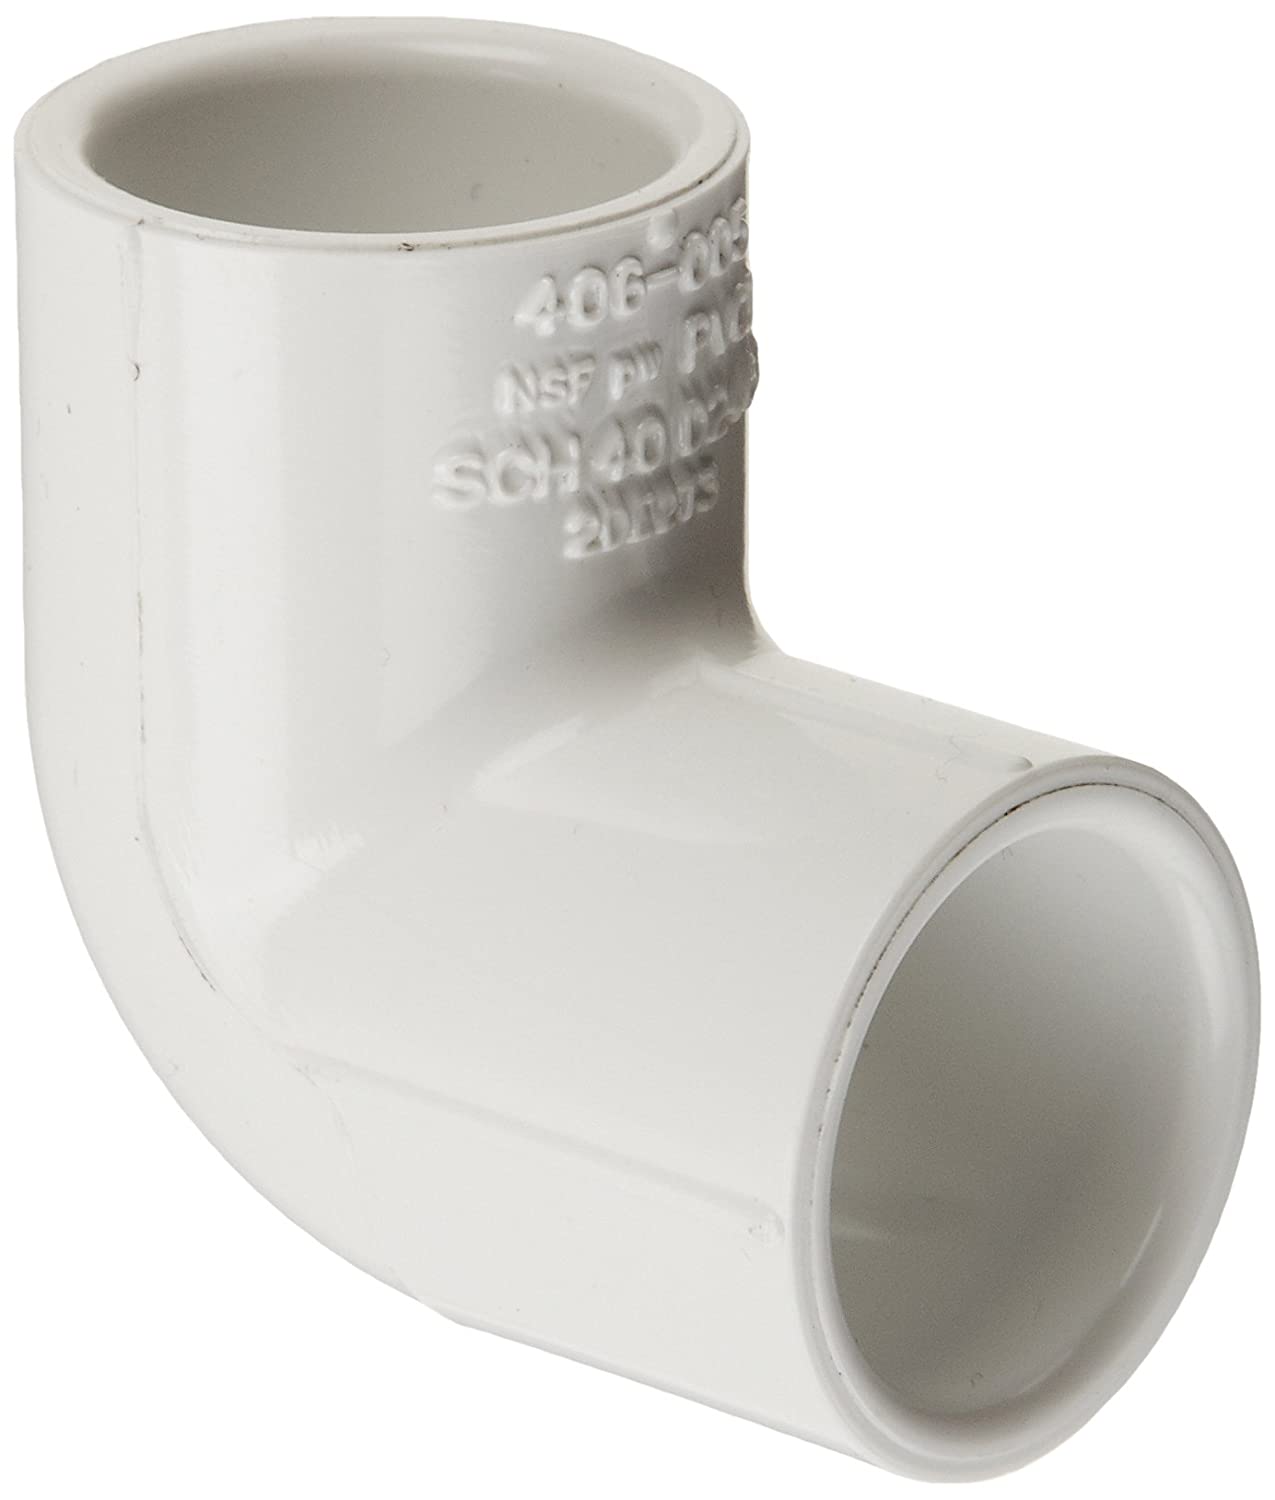 406-060 - PVC Pipe Fitting, 90 Degree Elbow, Schedule 40, White, 6" Socket